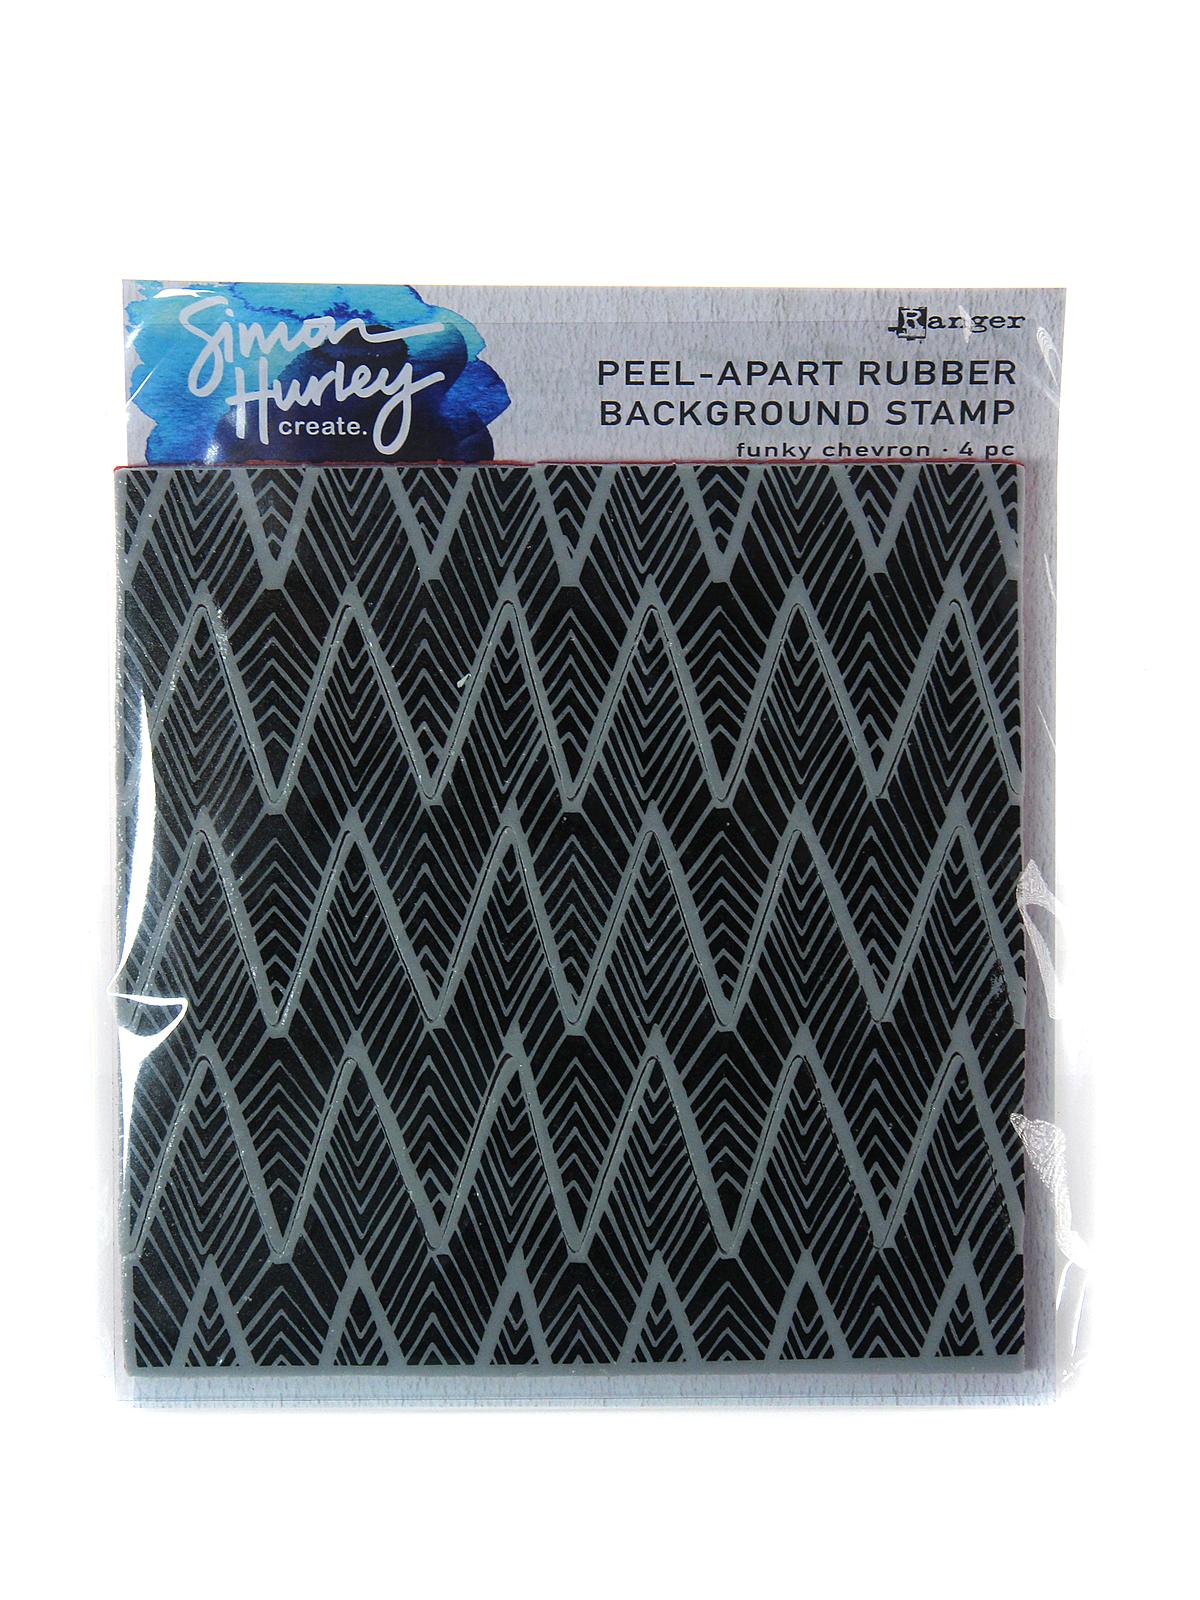 Simon Hurley Create. Background Stamps Funky Chevron 6 In. X 6 In. Each